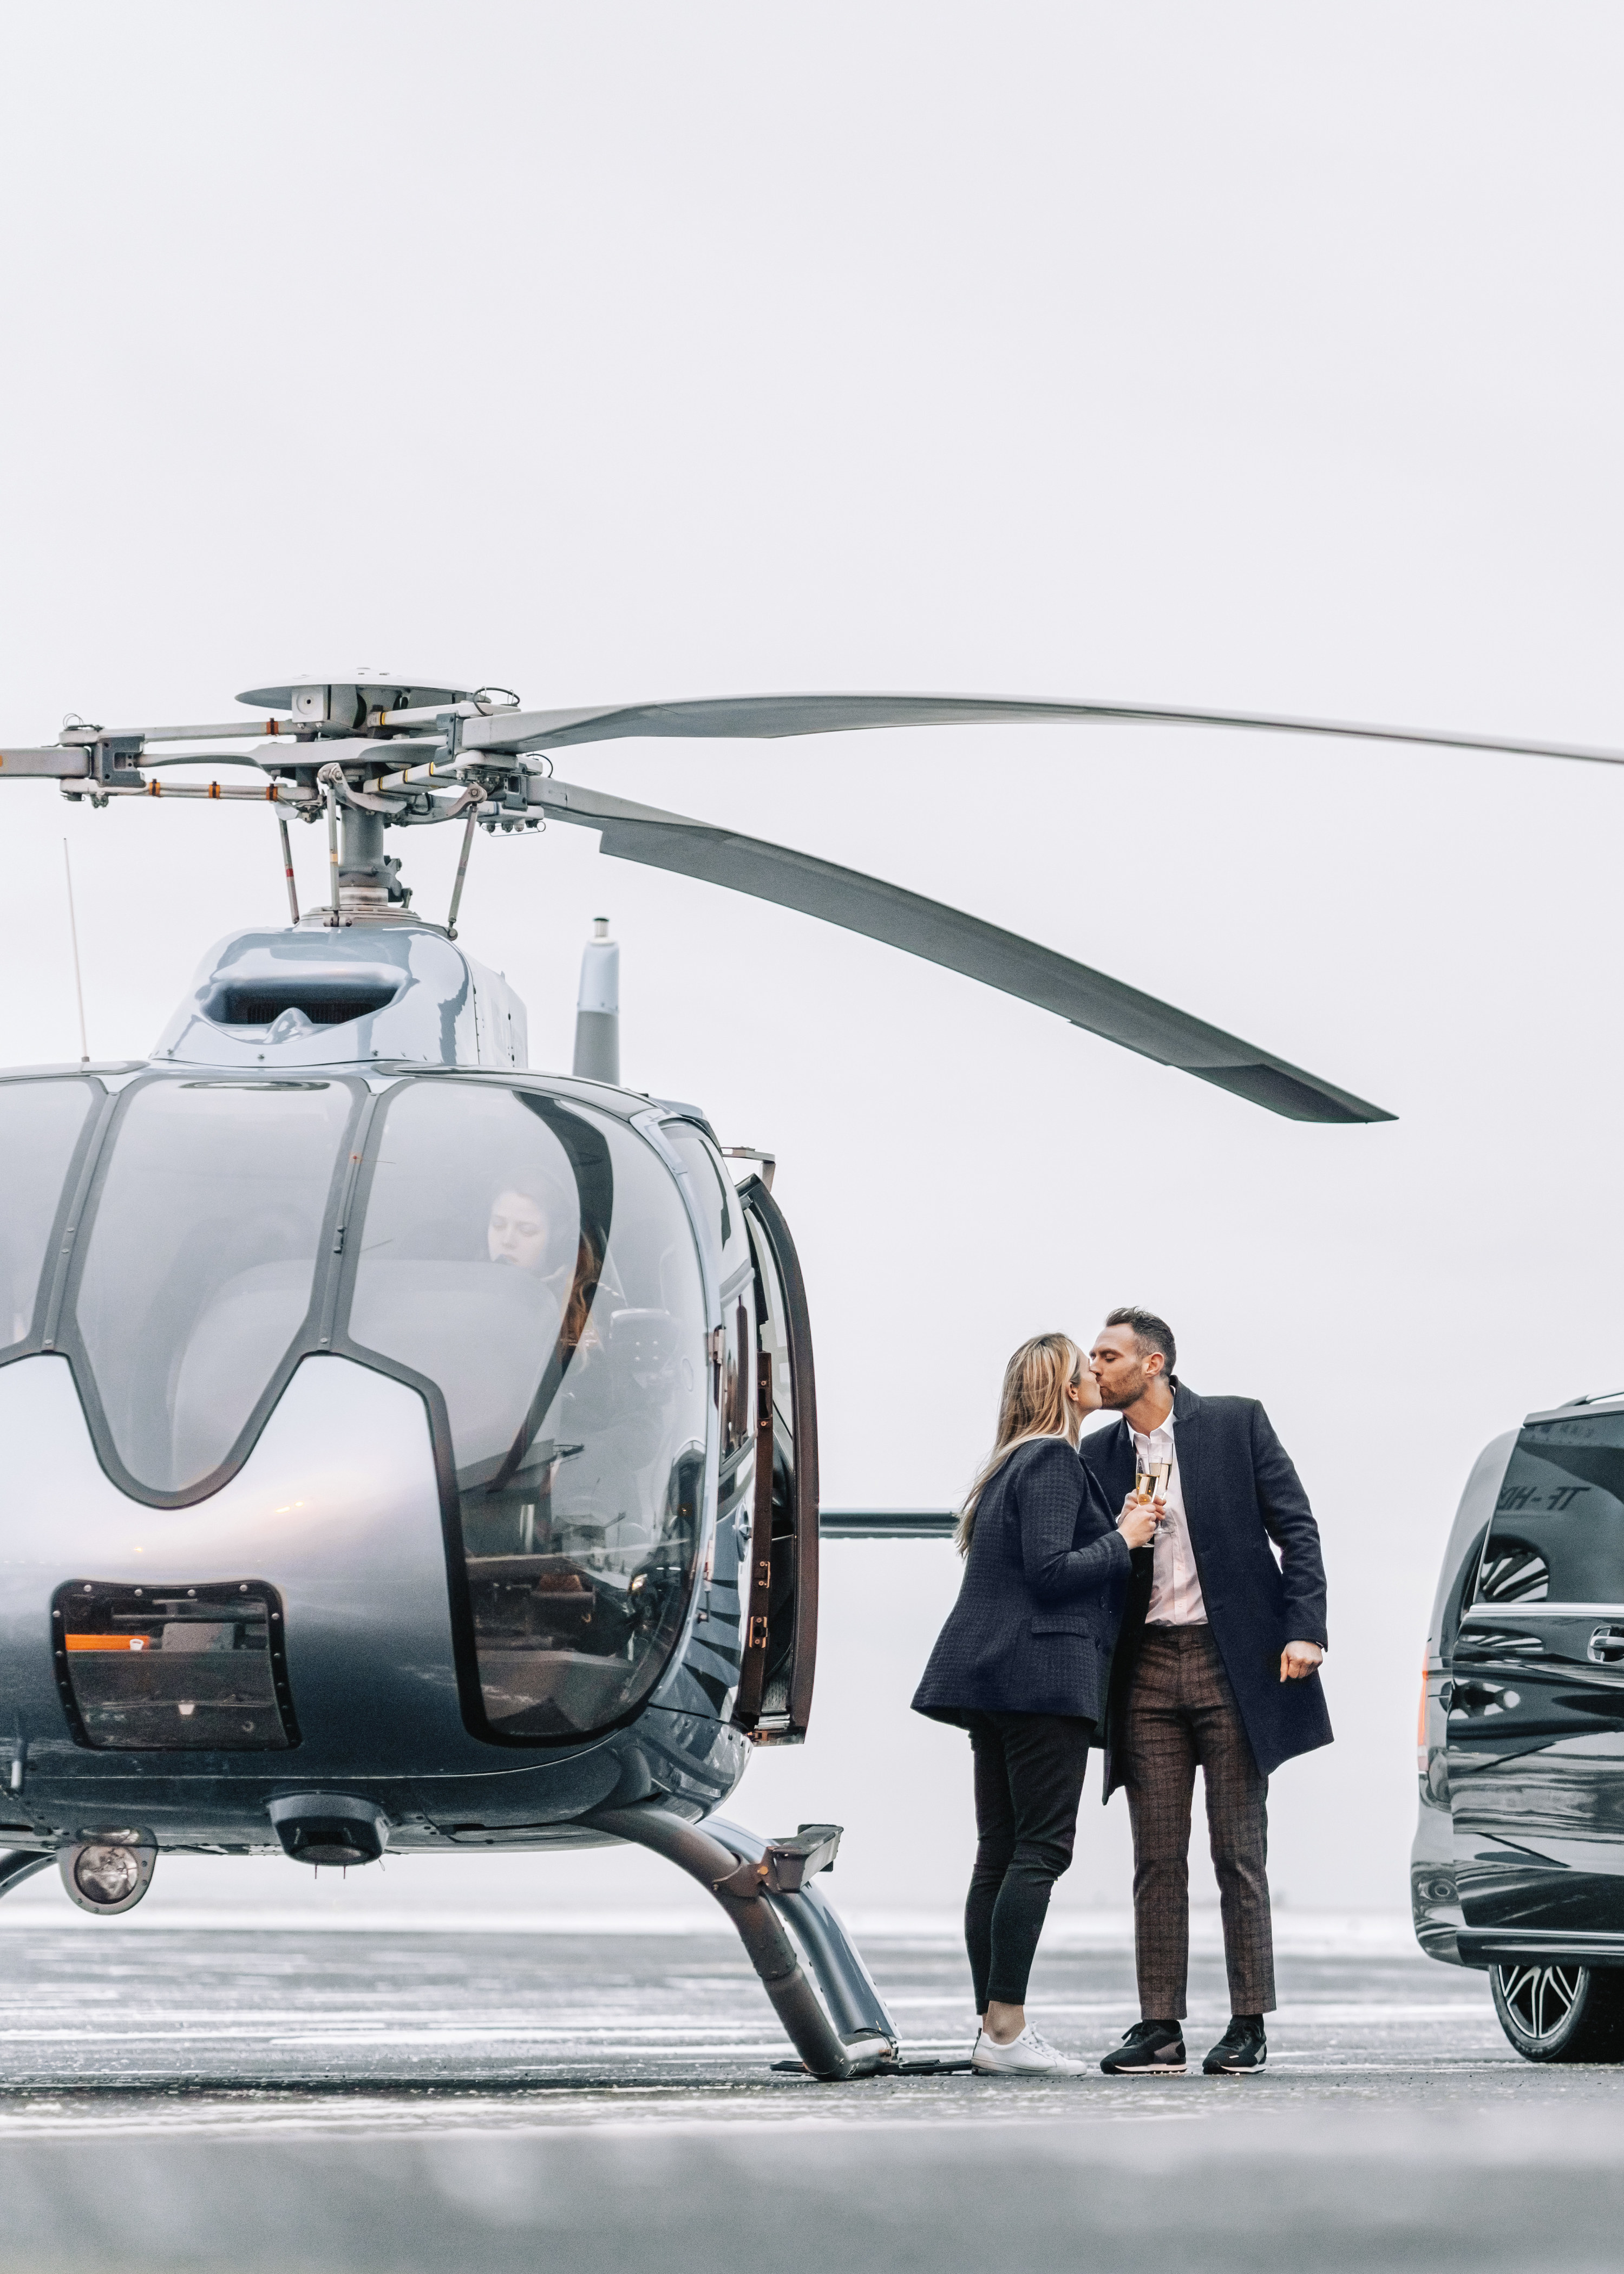 rich guy kissing his partner before getting in his helicoptor